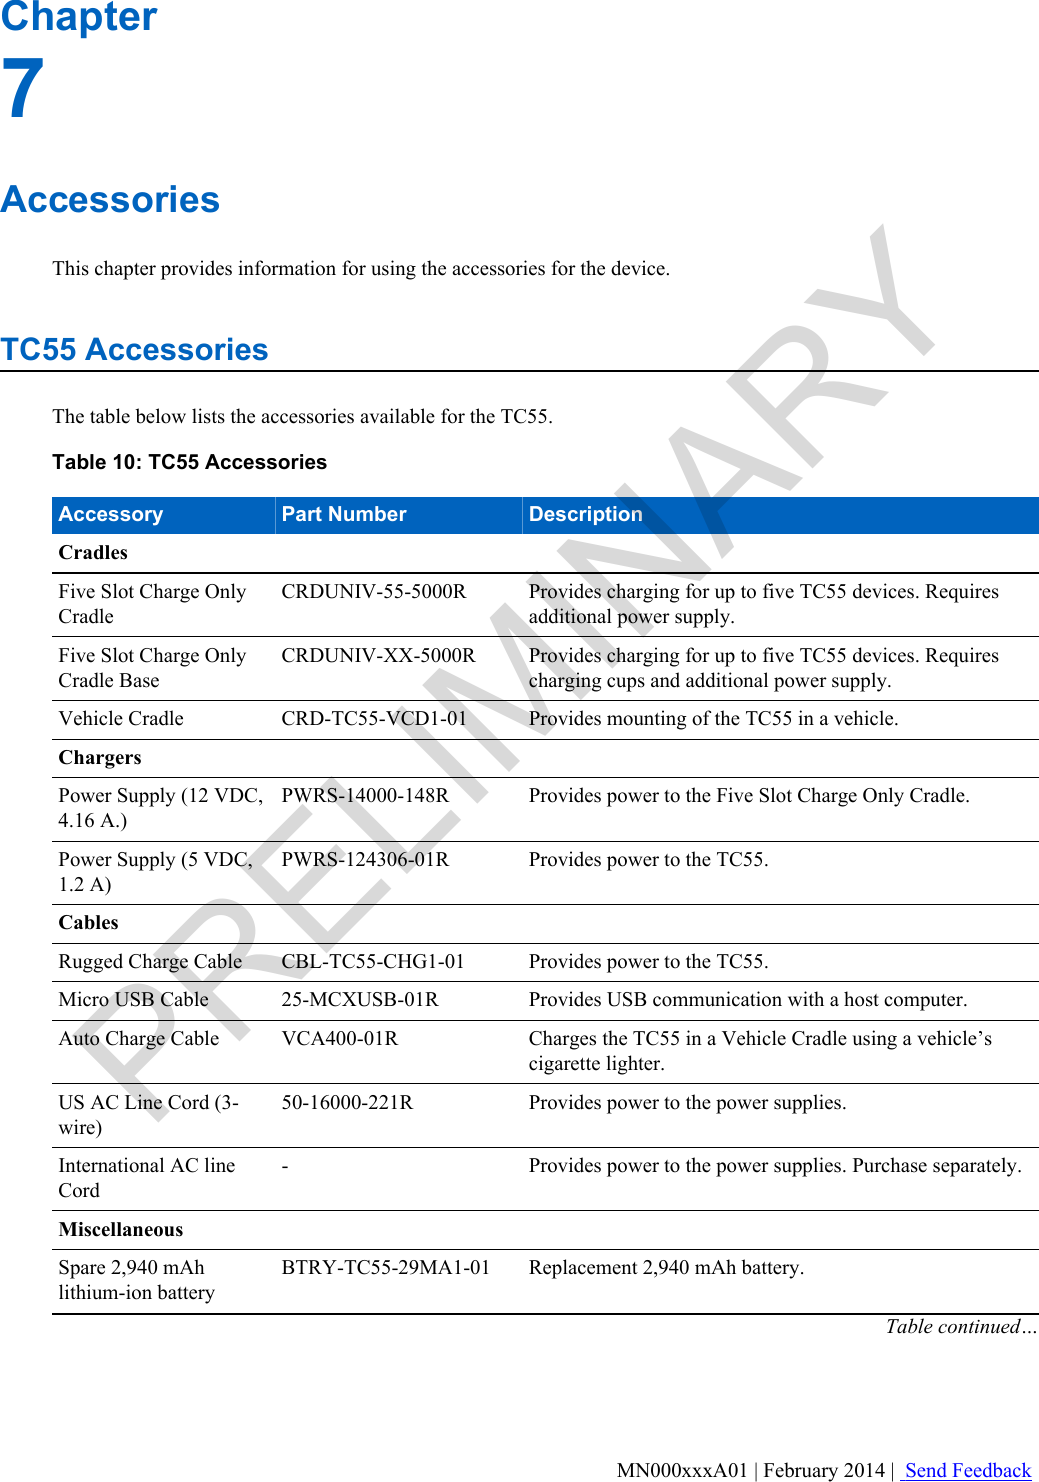 Chapter7AccessoriesThis chapter provides information for using the accessories for the device.TC55 AccessoriesThe table below lists the accessories available for the TC55.Table 10: TC55 AccessoriesAccessory Part Number DescriptionCradlesFive Slot Charge OnlyCradleCRDUNIV-55-5000R Provides charging for up to five TC55 devices. Requiresadditional power supply.Five Slot Charge OnlyCradle Base CRDUNIV-XX-5000R Provides charging for up to five TC55 devices. Requirescharging cups and additional power supply.Vehicle Cradle CRD-TC55-VCD1-01 Provides mounting of the TC55 in a vehicle.ChargersPower Supply (12 VDC,4.16 A.)PWRS-14000-148R Provides power to the Five Slot Charge Only Cradle.Power Supply (5 VDC,1.2 A)PWRS-124306-01R Provides power to the TC55.CablesRugged Charge Cable CBL-TC55-CHG1-01 Provides power to the TC55.Micro USB Cable 25-MCXUSB-01R Provides USB communication with a host computer.Auto Charge Cable VCA400-01R Charges the TC55 in a Vehicle Cradle using a vehicle’scigarette lighter.US AC Line Cord (3-wire)50-16000-221R Provides power to the power supplies.International AC lineCord- Provides power to the power supplies. Purchase separately.MiscellaneousSpare 2,940 mAhlithium-ion batteryBTRY-TC55-29MA1-01 Replacement 2,940 mAh battery.Table continued…MN000xxxA01 | February 2014 |  Send FeedbackPRELIMINARY